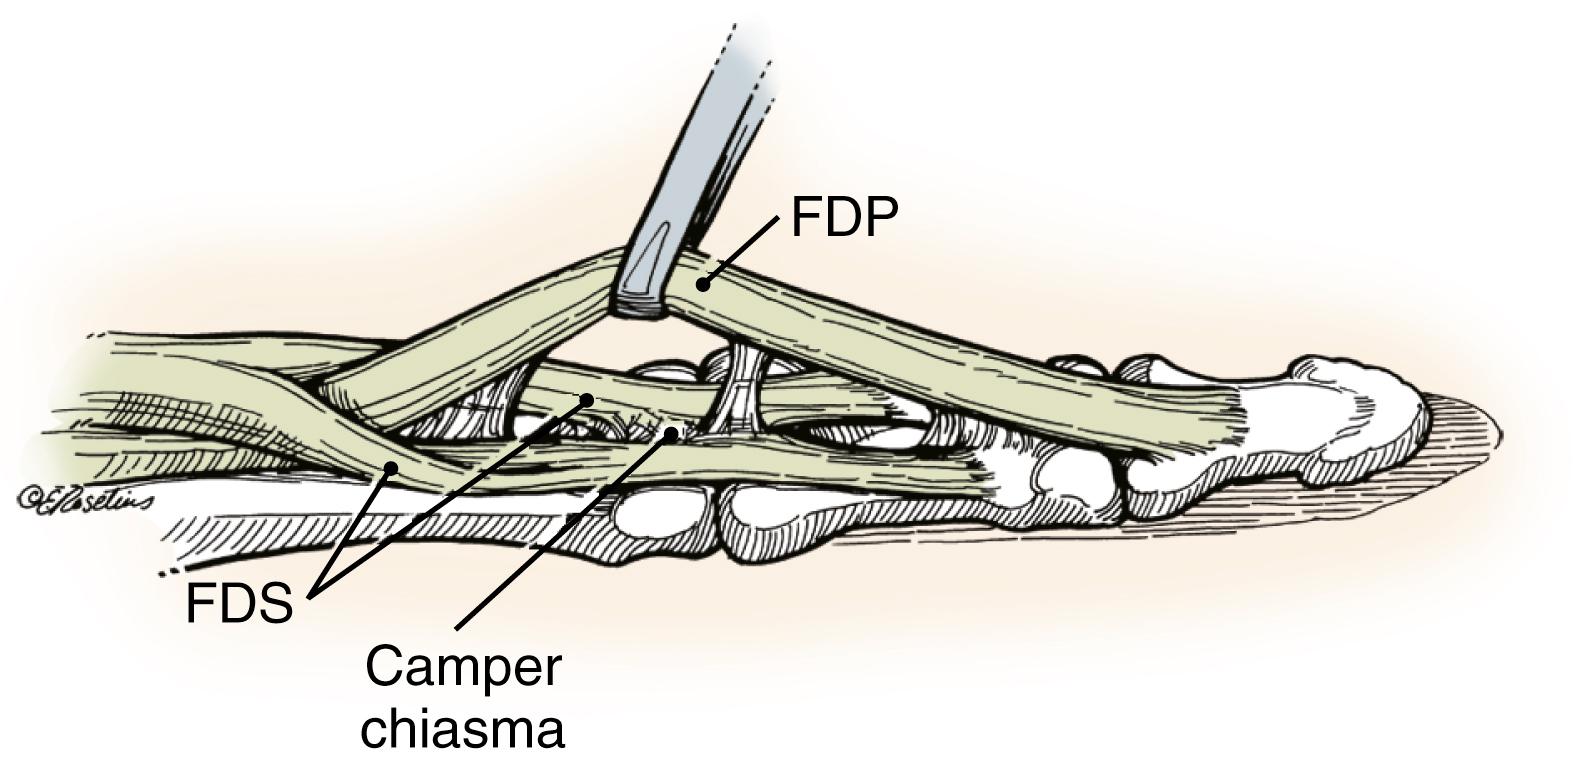 Fig. 6.3, In the proximal part of the flexor sheath, FDS tendon divides into two slips, which encircle the FDP tendon first at the volar aspect, then at the radial and ulnar aspects, and finally at the dorsal aspect. The two portions of the FDS tendon reunite at the Camper chiasm and redivide before inserting onto the middle three-fifths of the volar aspect of the middle phalanx, forming the floor of the flexor sheath in this area.